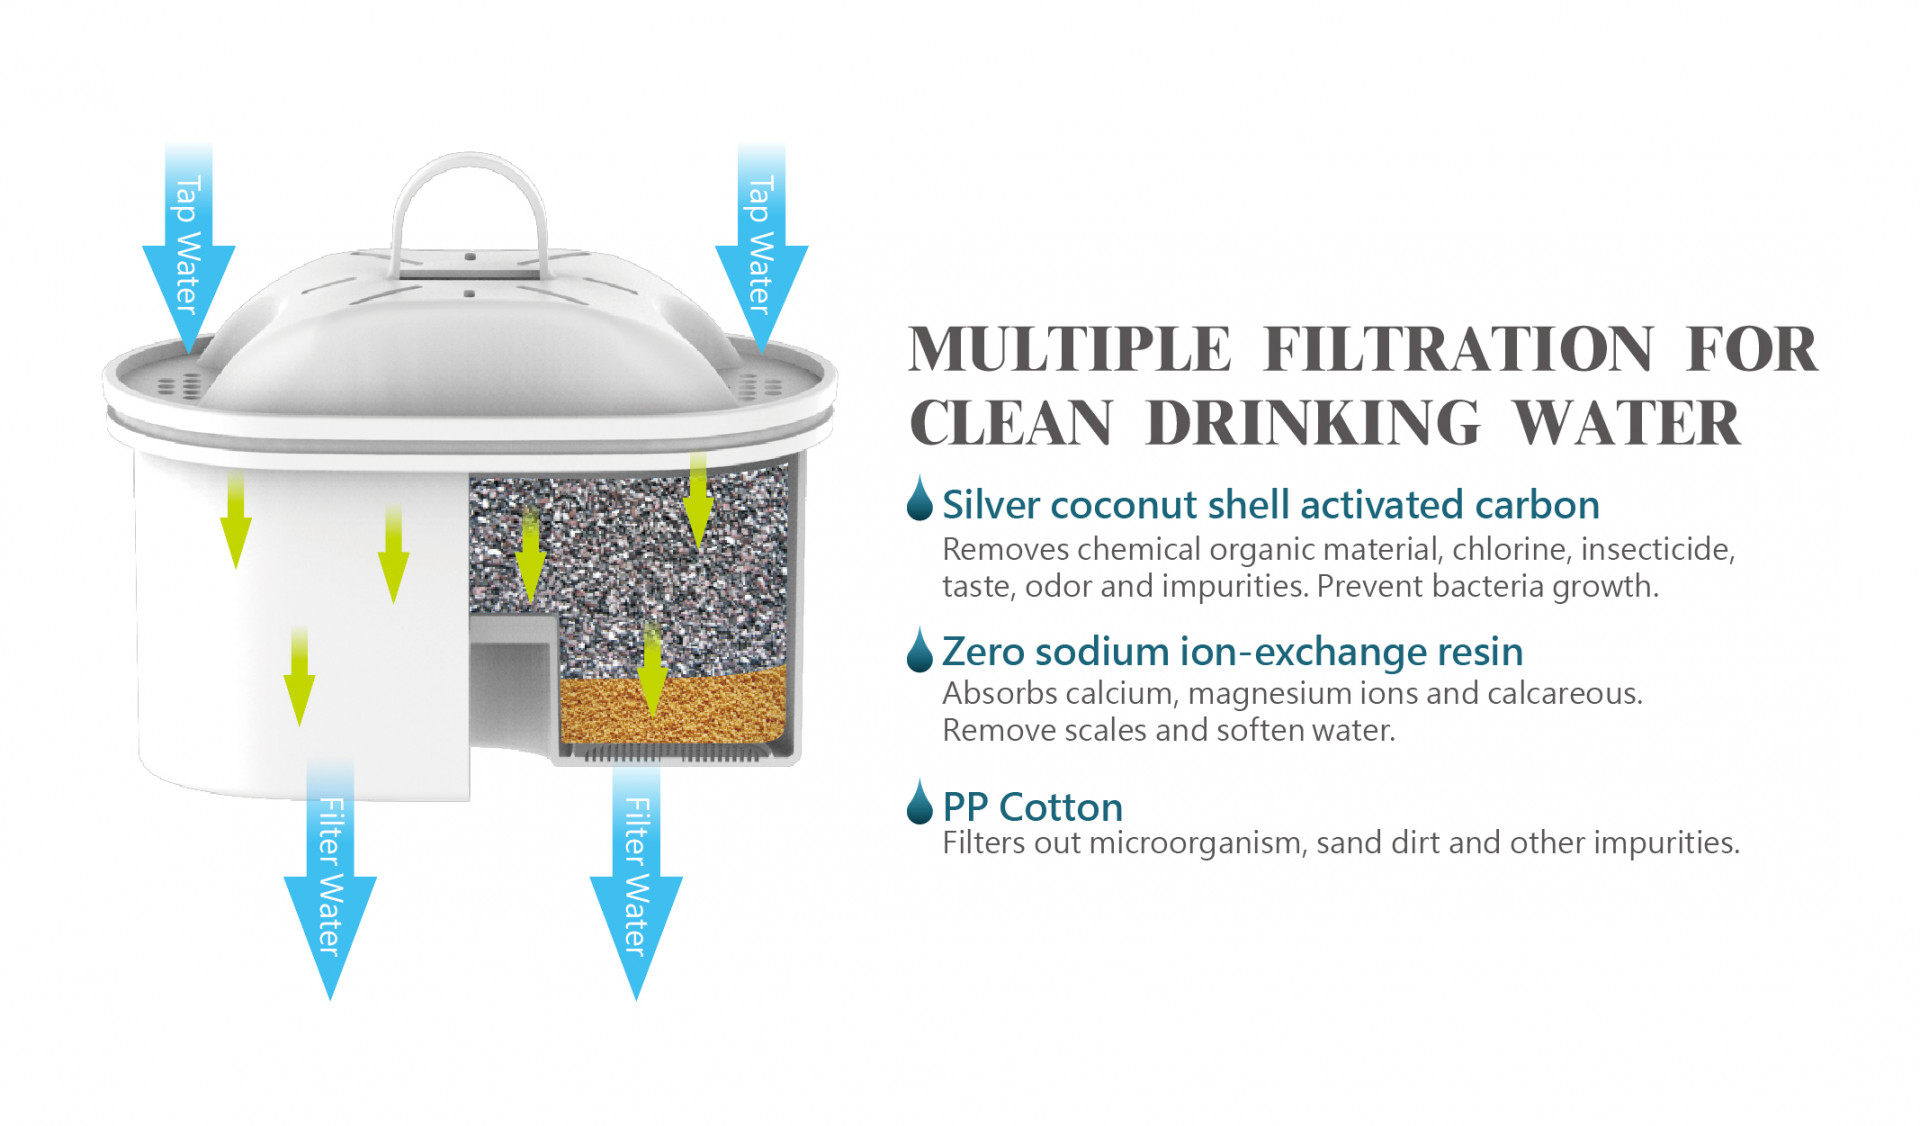 WATER PURIFIER MUTIPLE FILTRATION FOR CLEAN DRINKING WATER